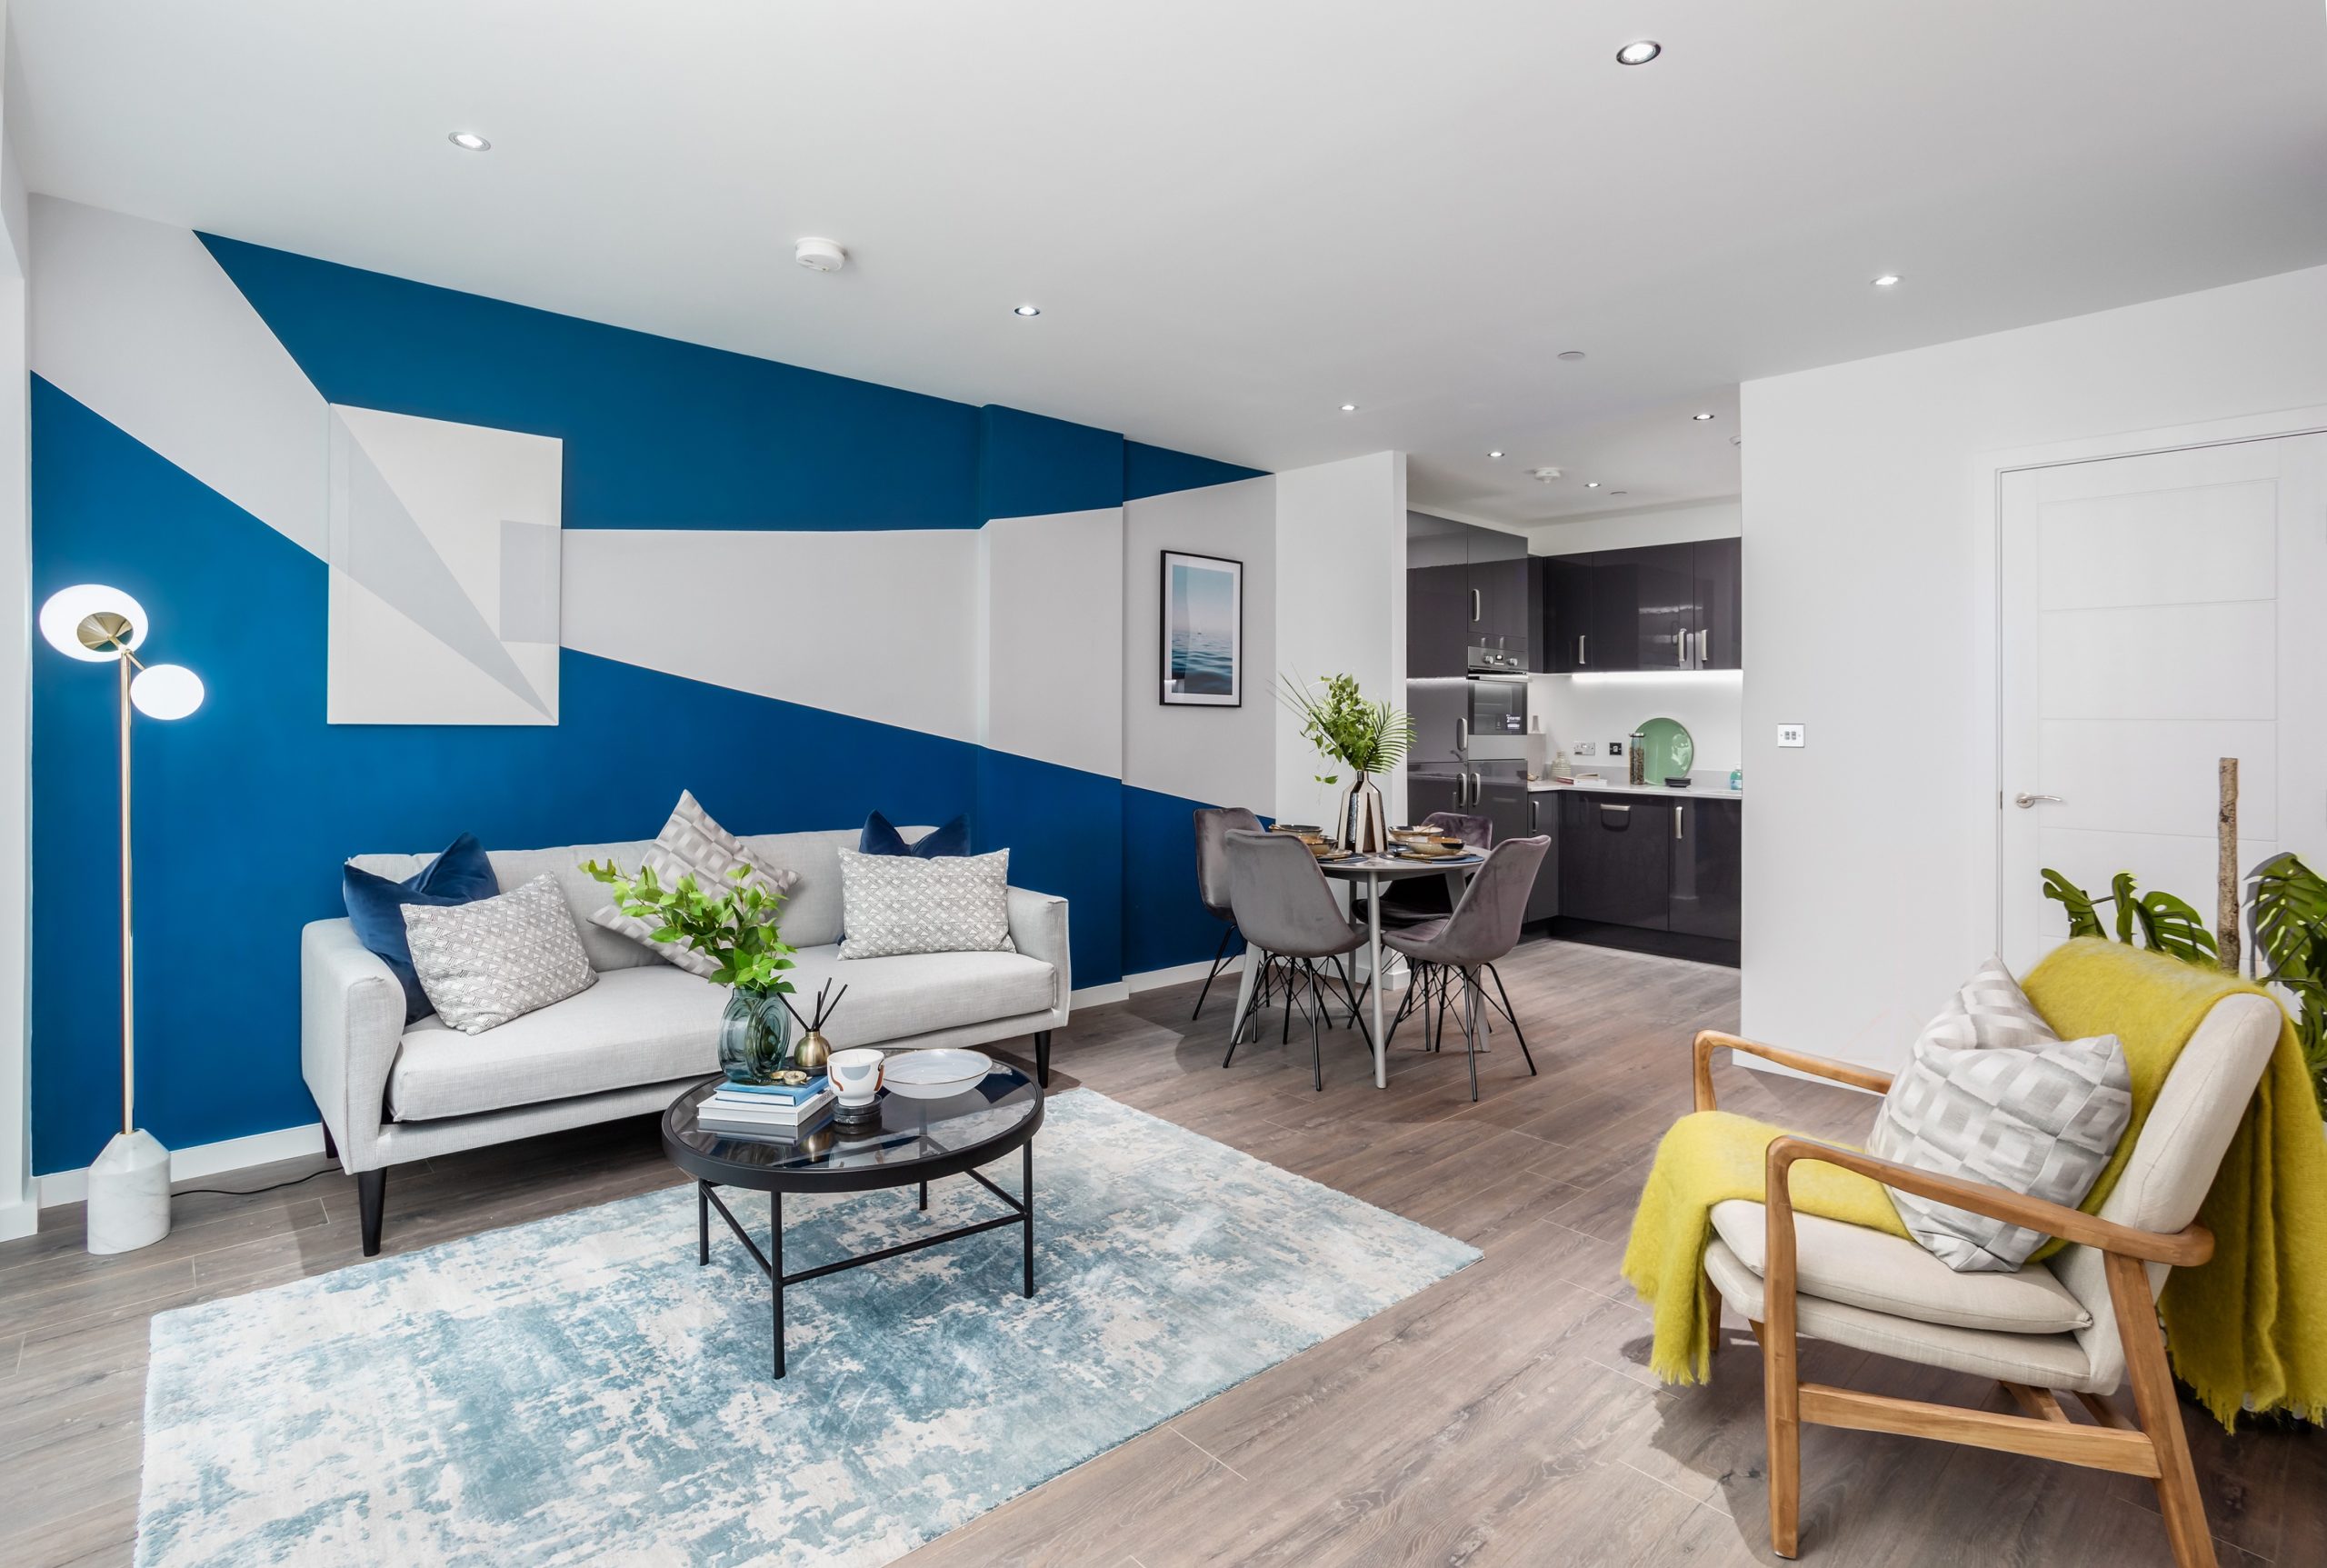 Brunel Street Works Show Home - Shared Ownership homes available on Share to Buy